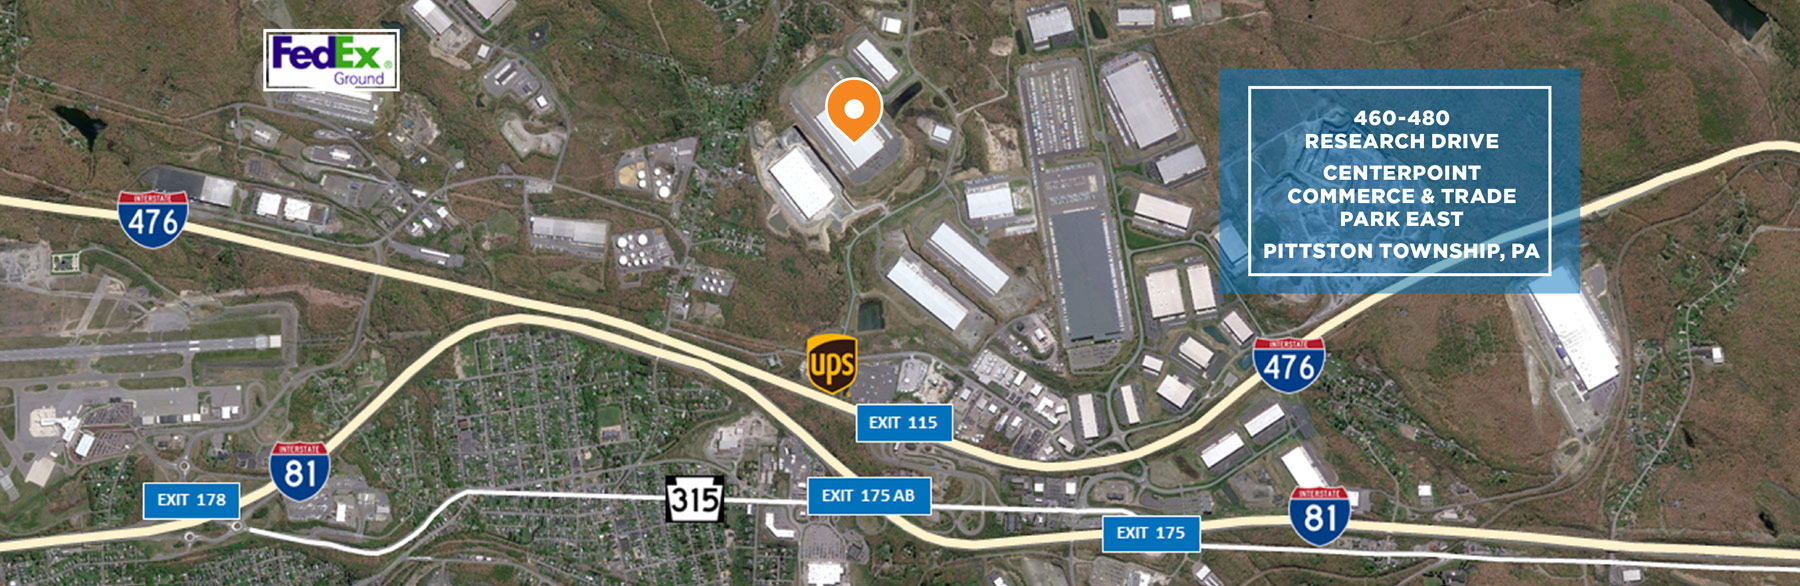 460-480 Research Drive, CenterPoint East, Pittston, PA highway access